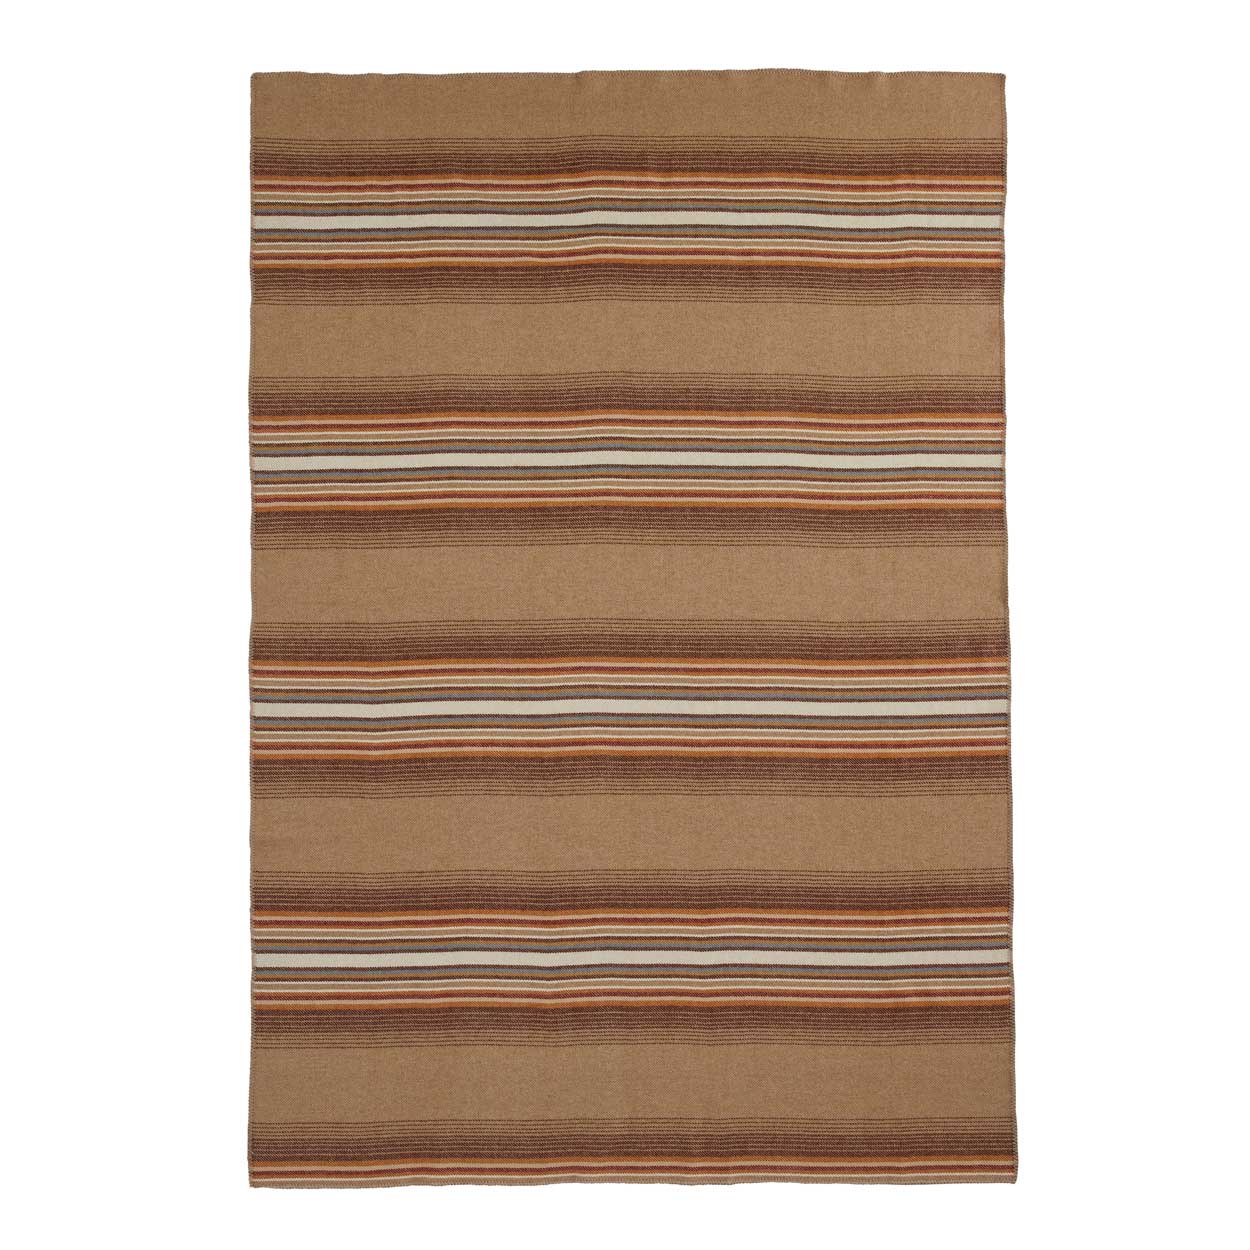 Load image into Gallery viewer, Pendleton Eco Wise Sienna Stripe Blanket
